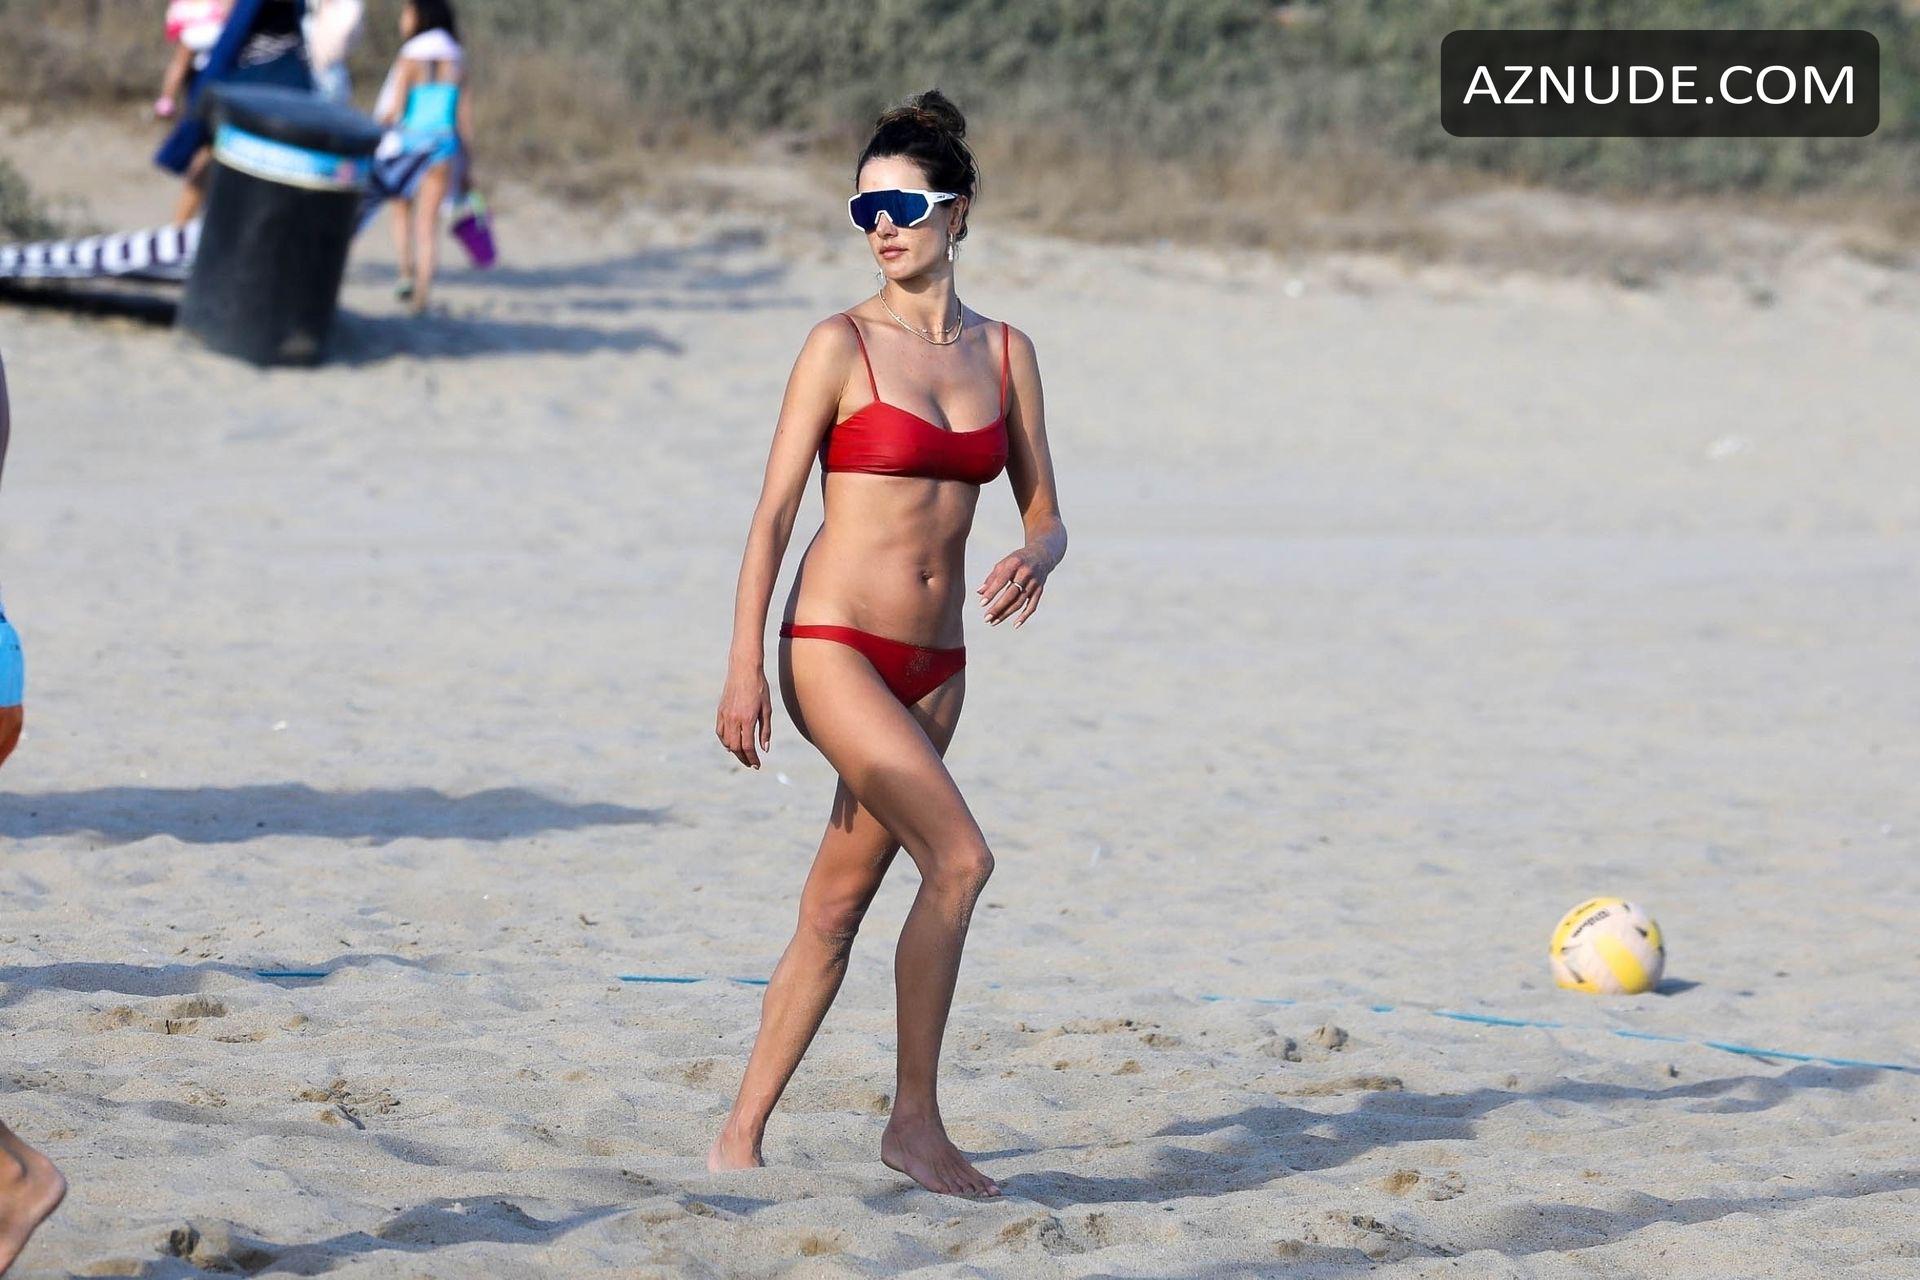 Alessandra Ambrosio In A Red Bikini While Out Playing